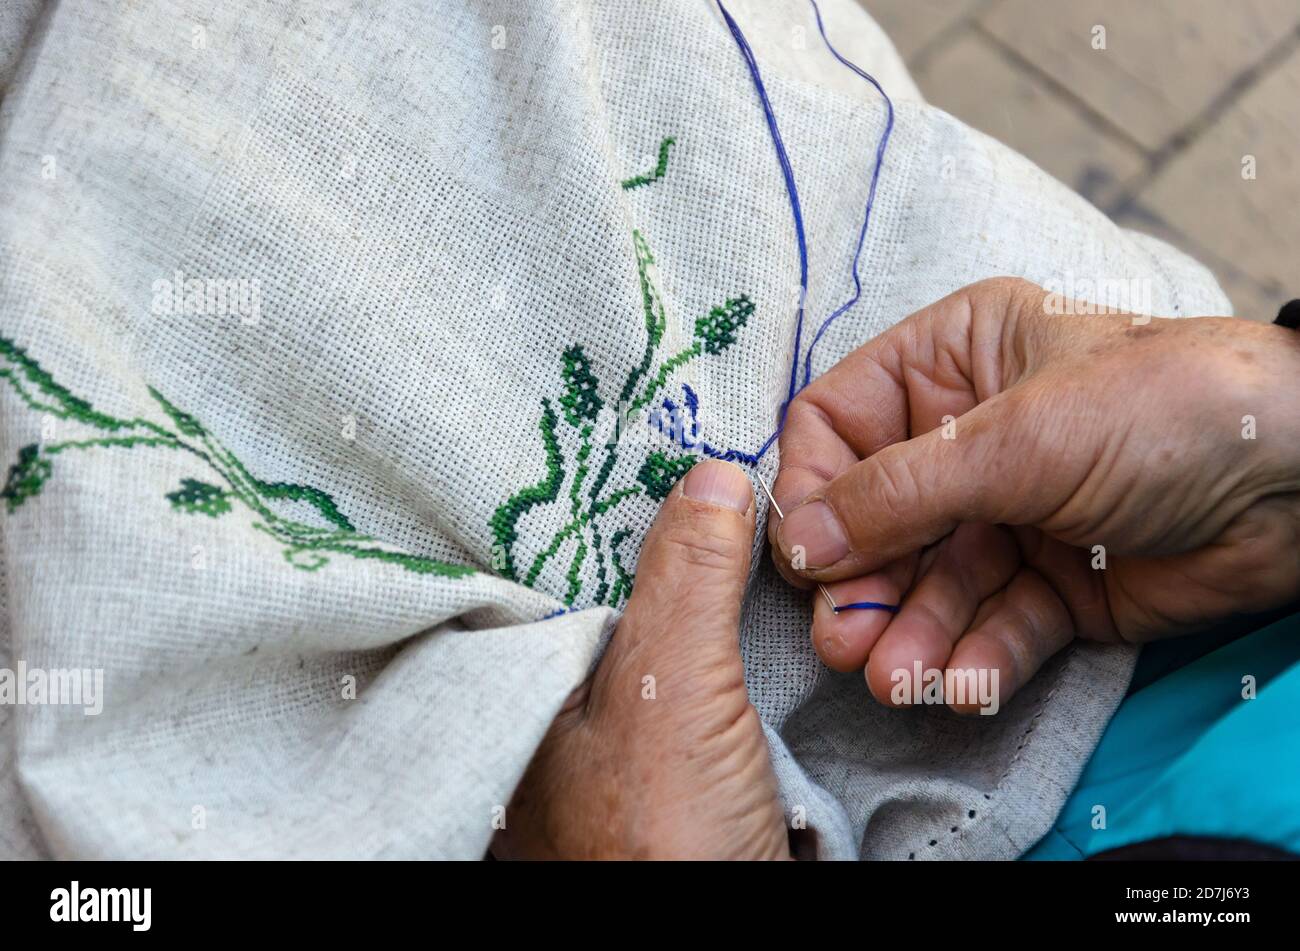 Hands of an elderly woman embroidering a cross-stitch floral pattern on linen fabric. Embroidery, handwork, needlecraft concept. Close-up Stock Photo